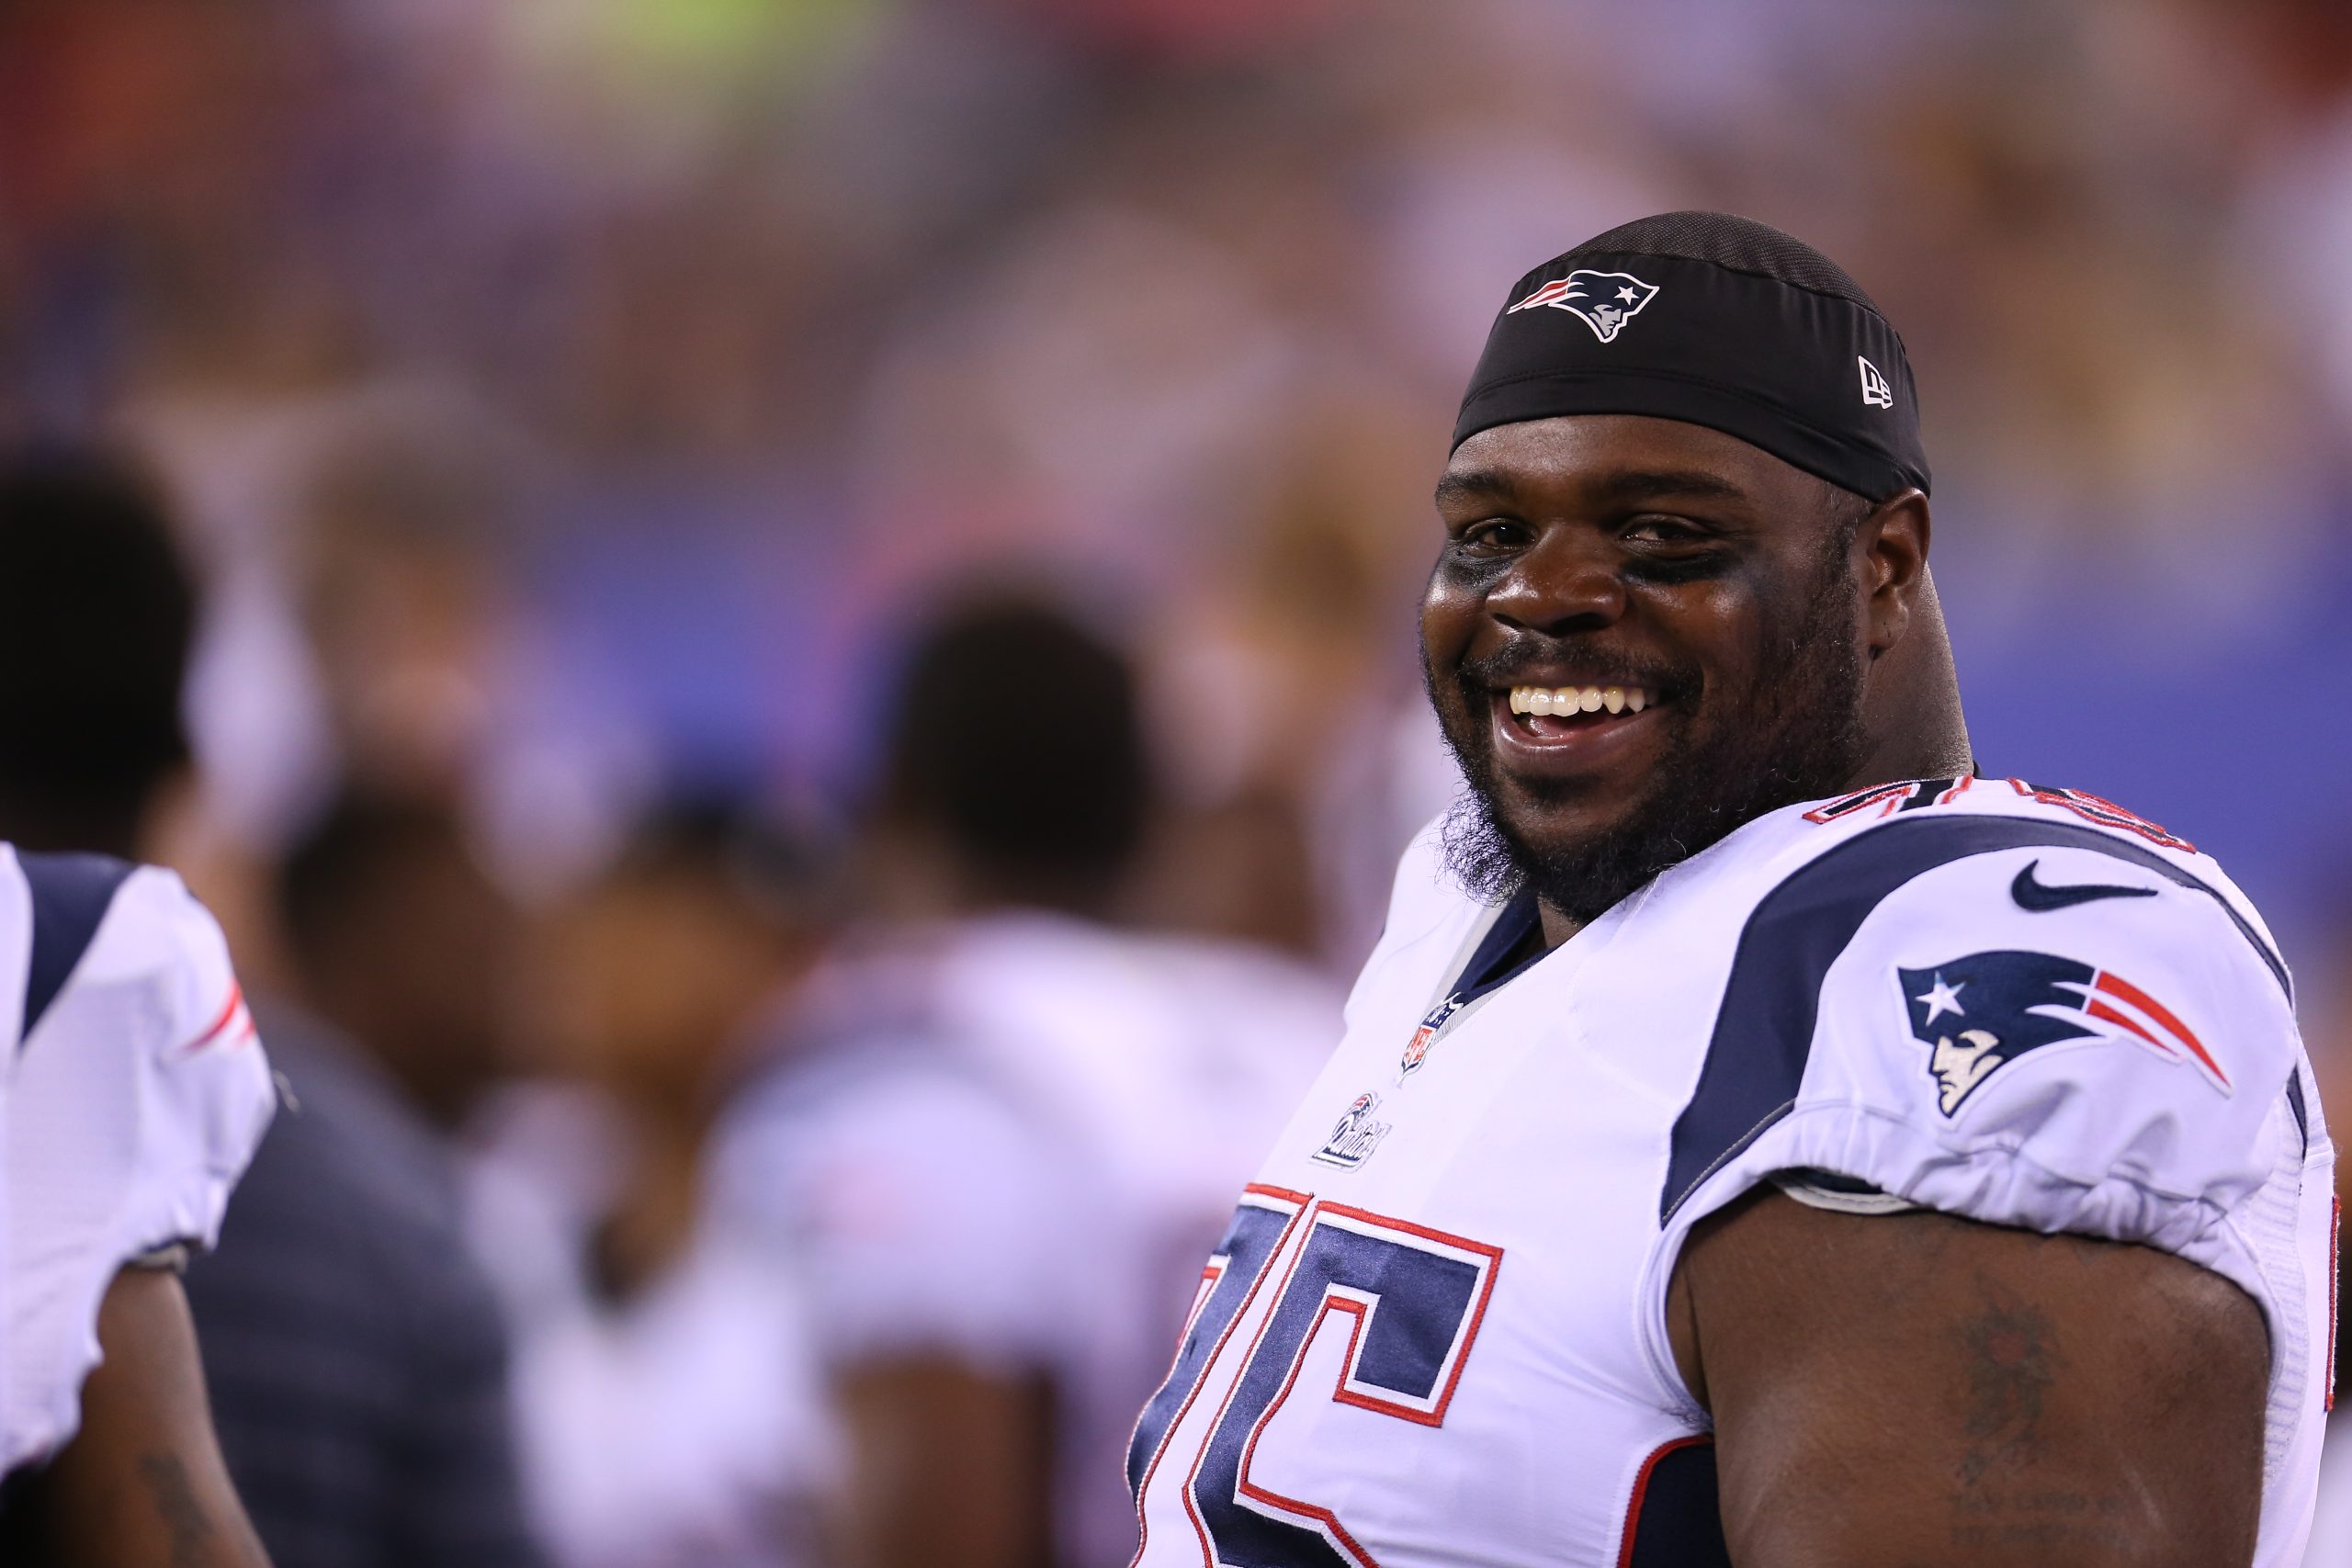 Vince Wilfork wears 'World's Greatest Farter' shirt at press conference  (Photo)